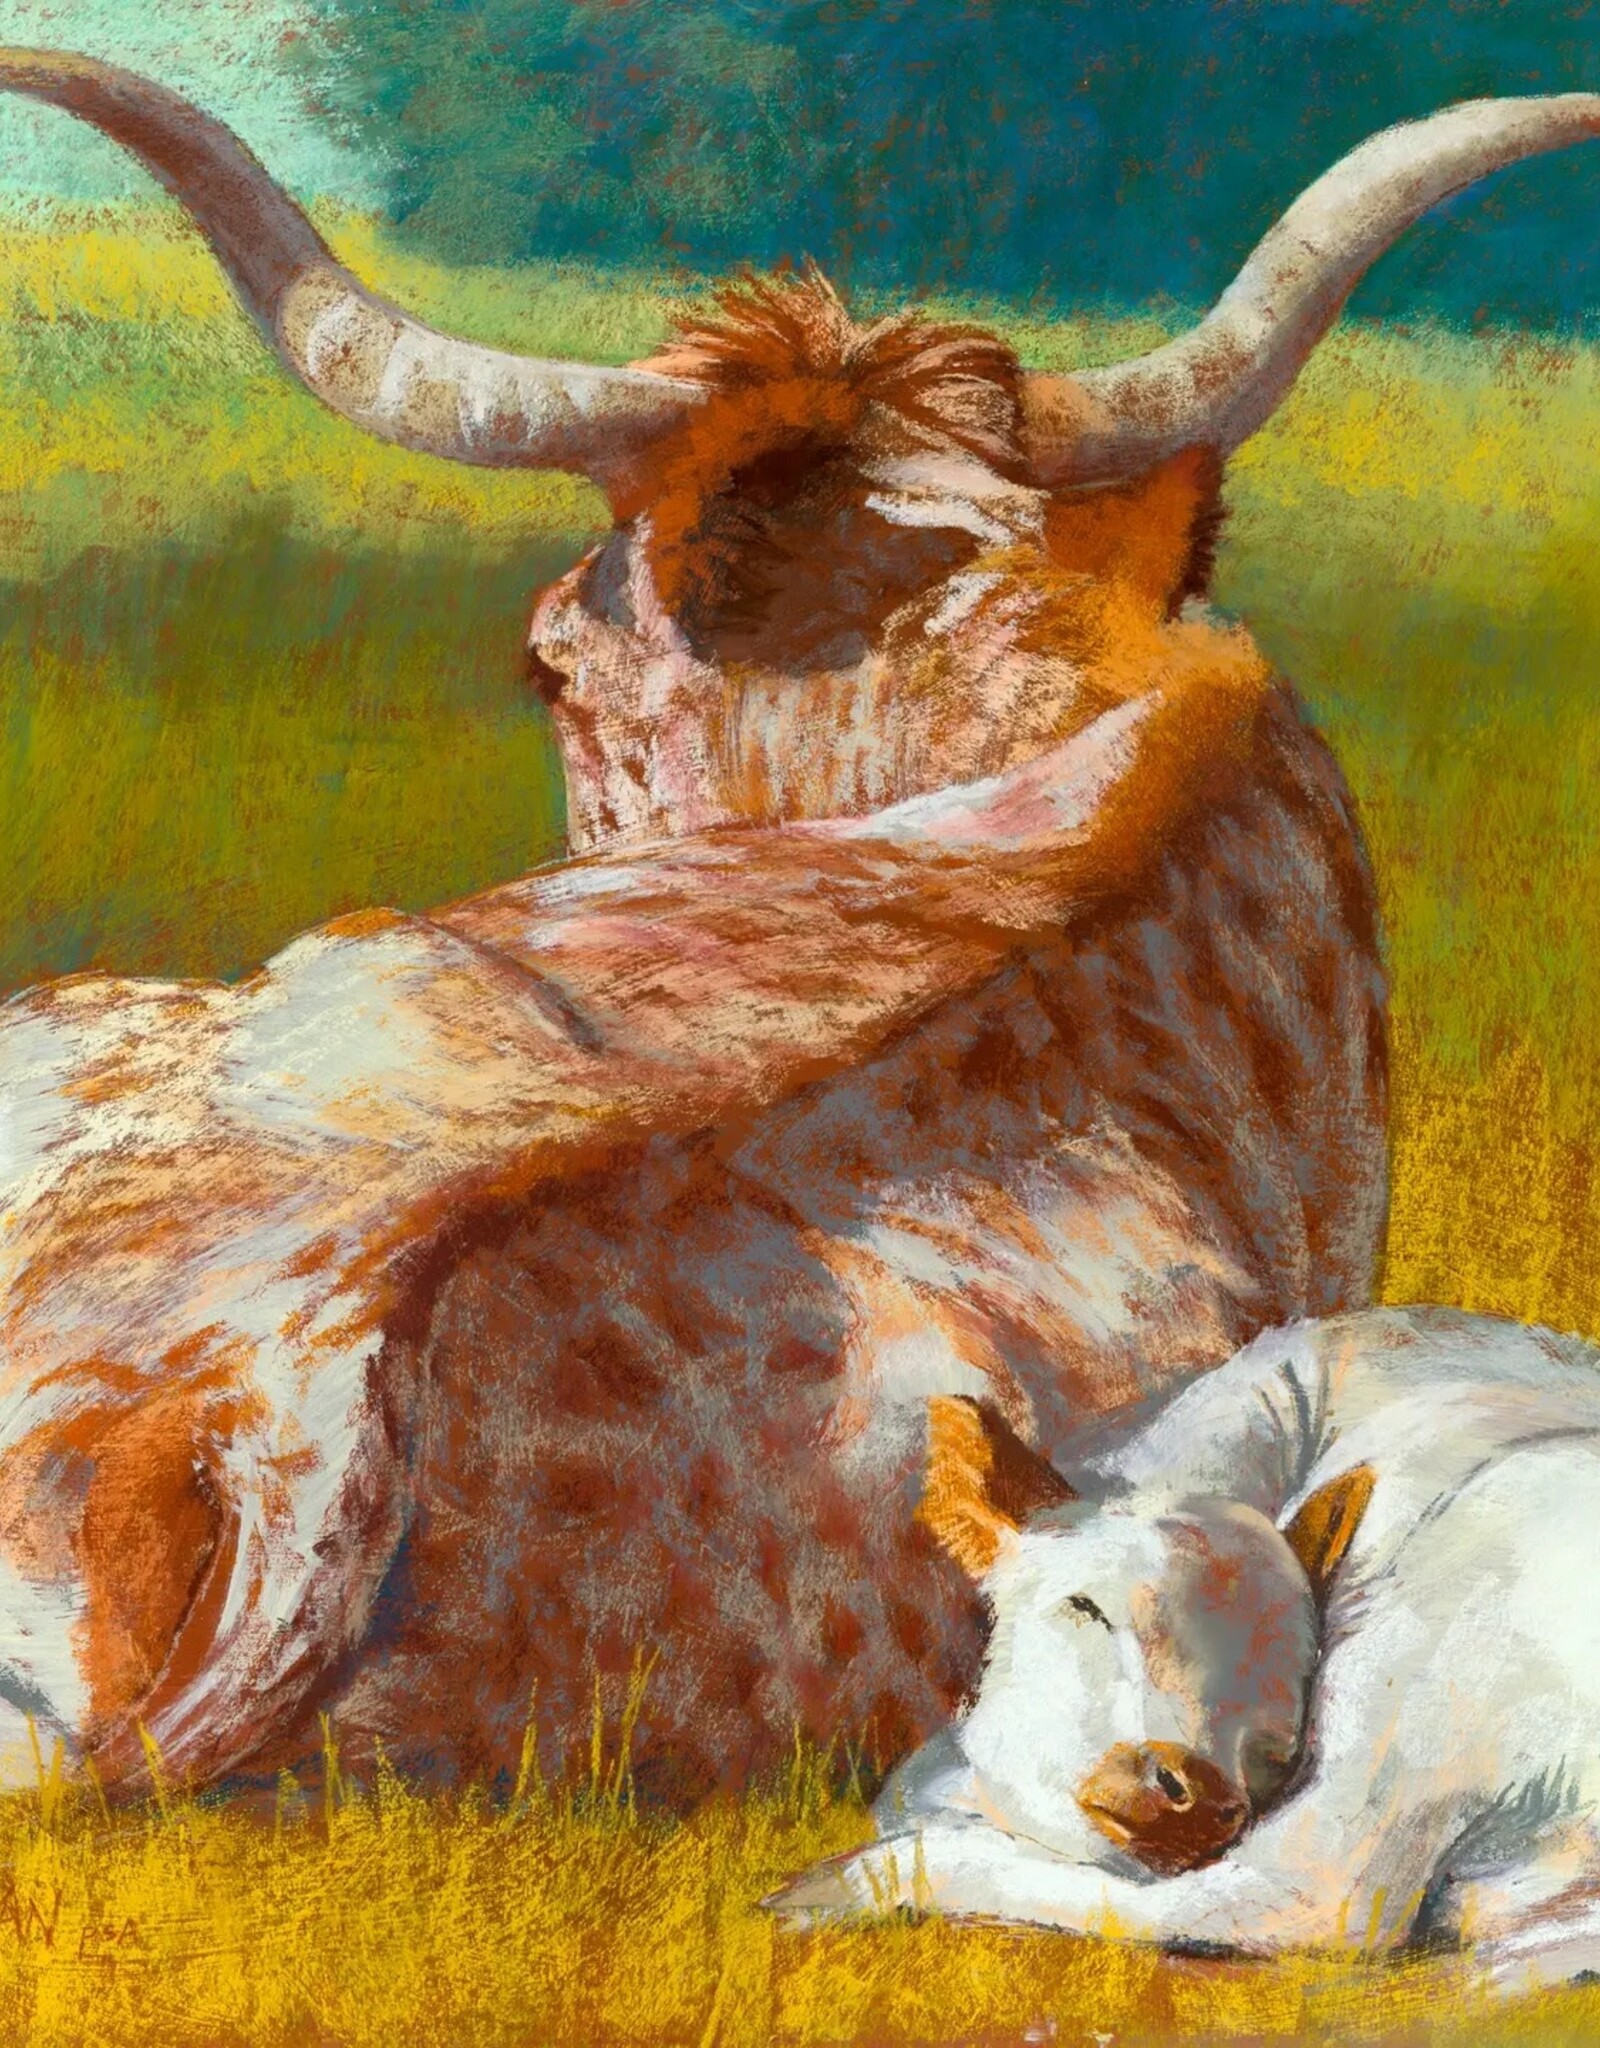 Greenbox Art Pastoral Portraits - Afternoon Nap Stretched Canvas 18" x 18"